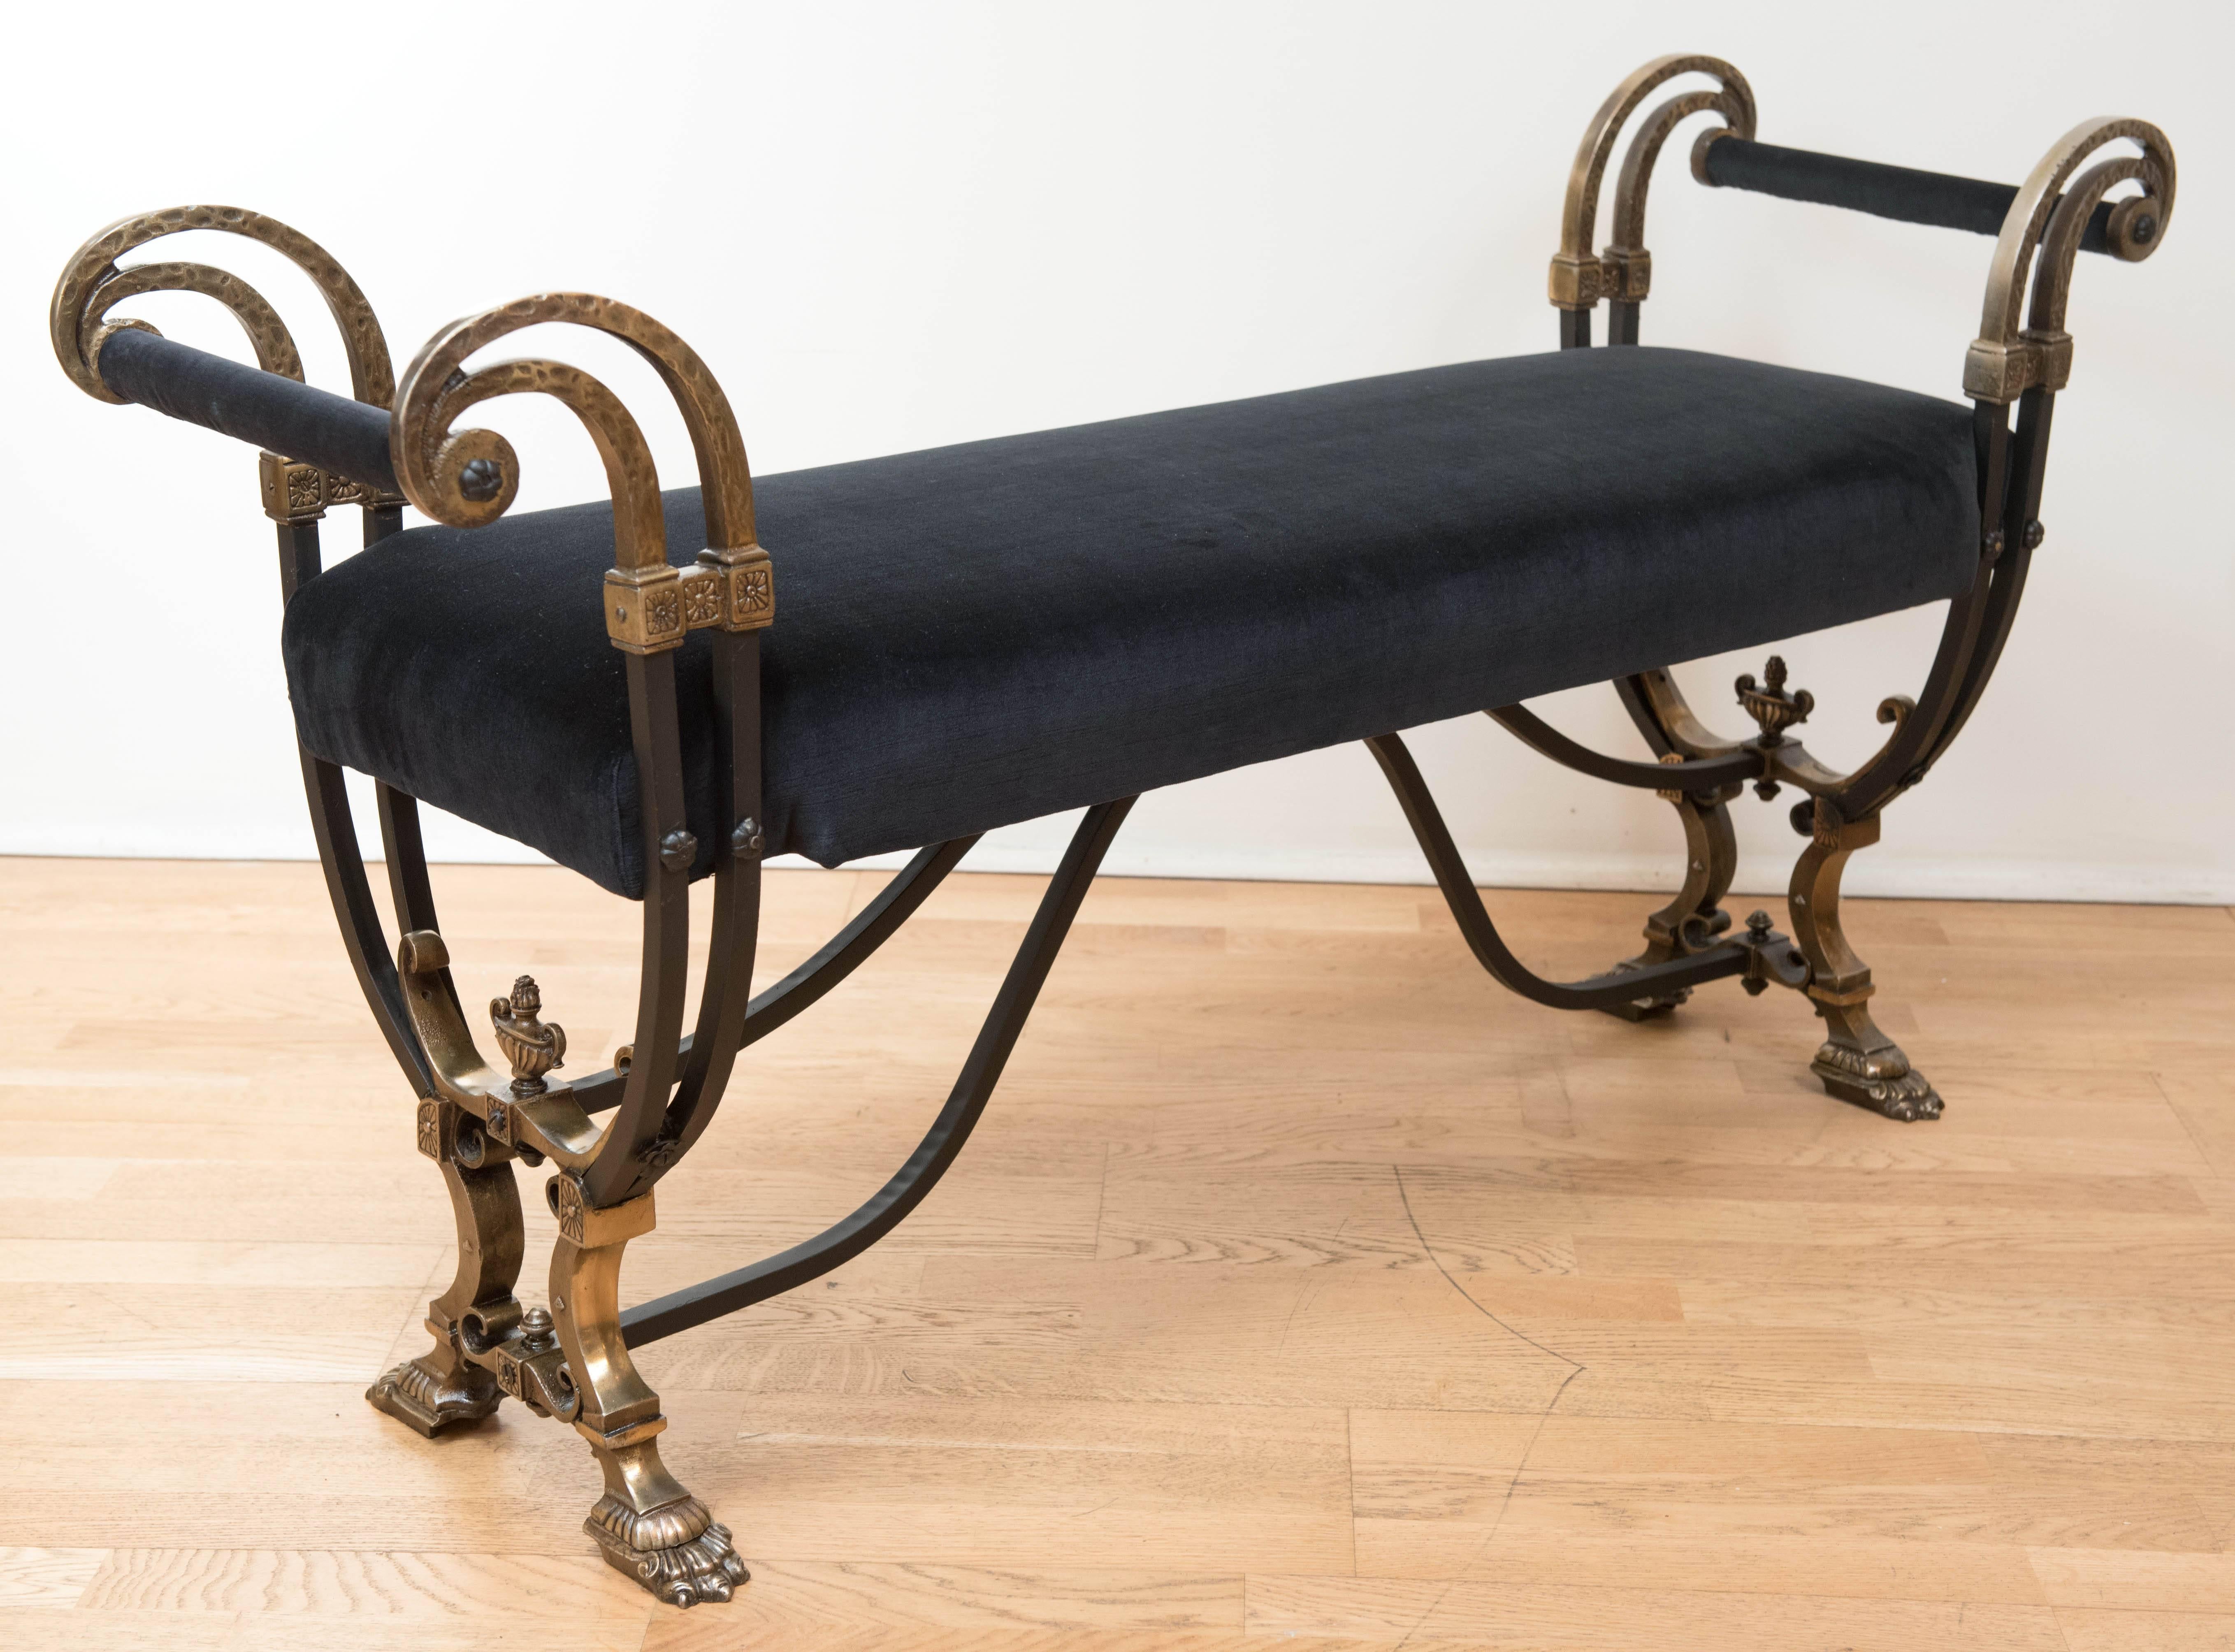 A most magnificent and detailed hallway bench in painted wrought iron with solid cast metal details in brass plate. The bench and handles have been reupholstered in black velvet.